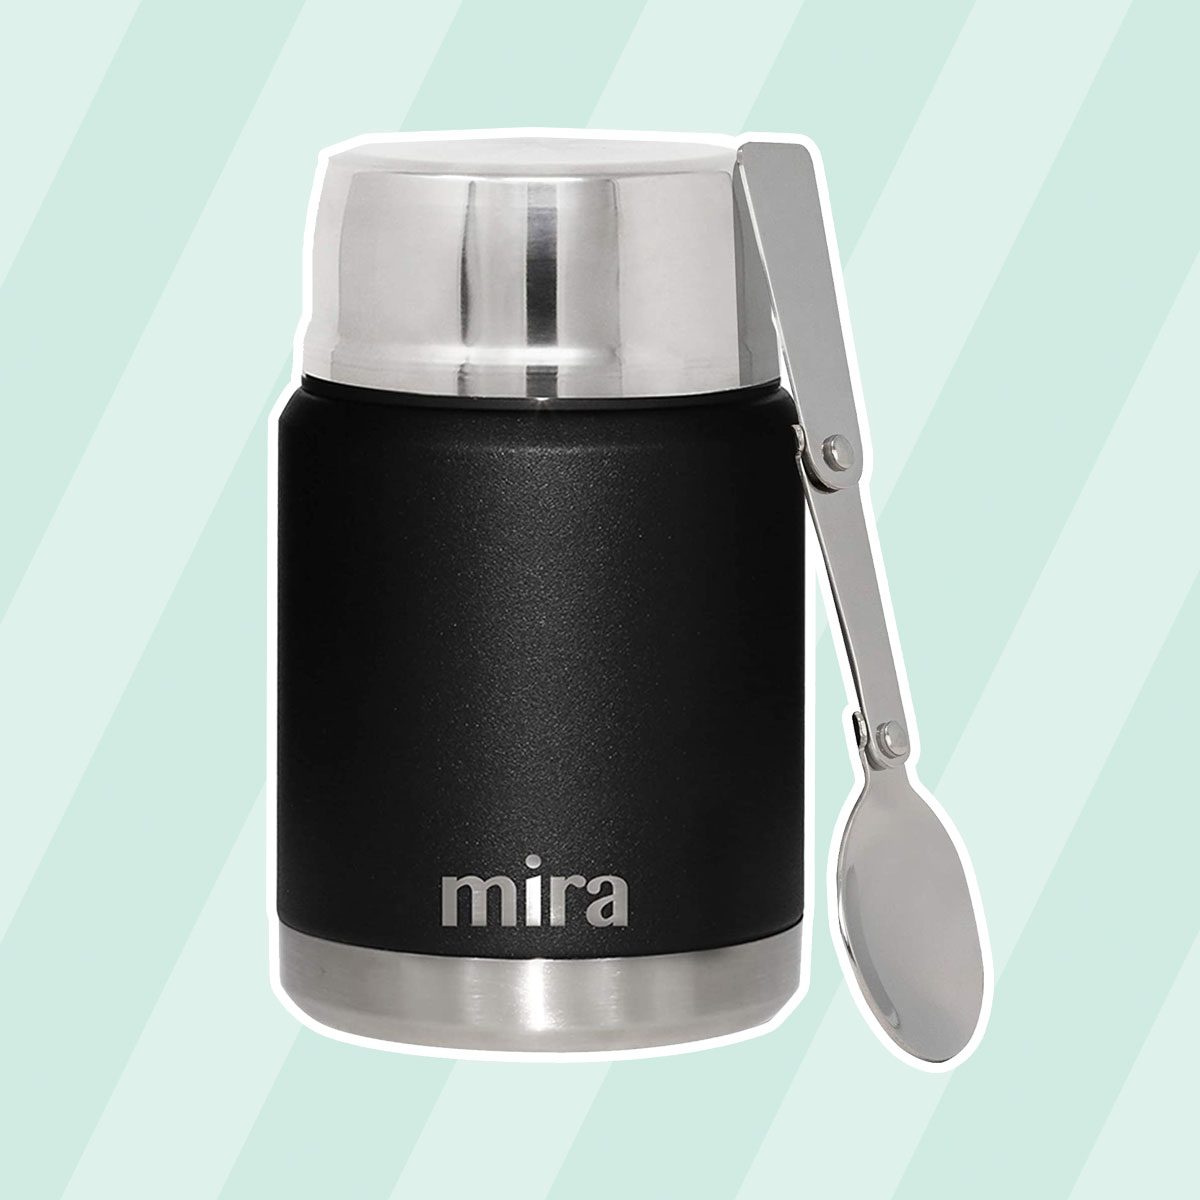 MIRA 9 oz Lunch, Food Jar - Vacuum Insulated Stainless Steel